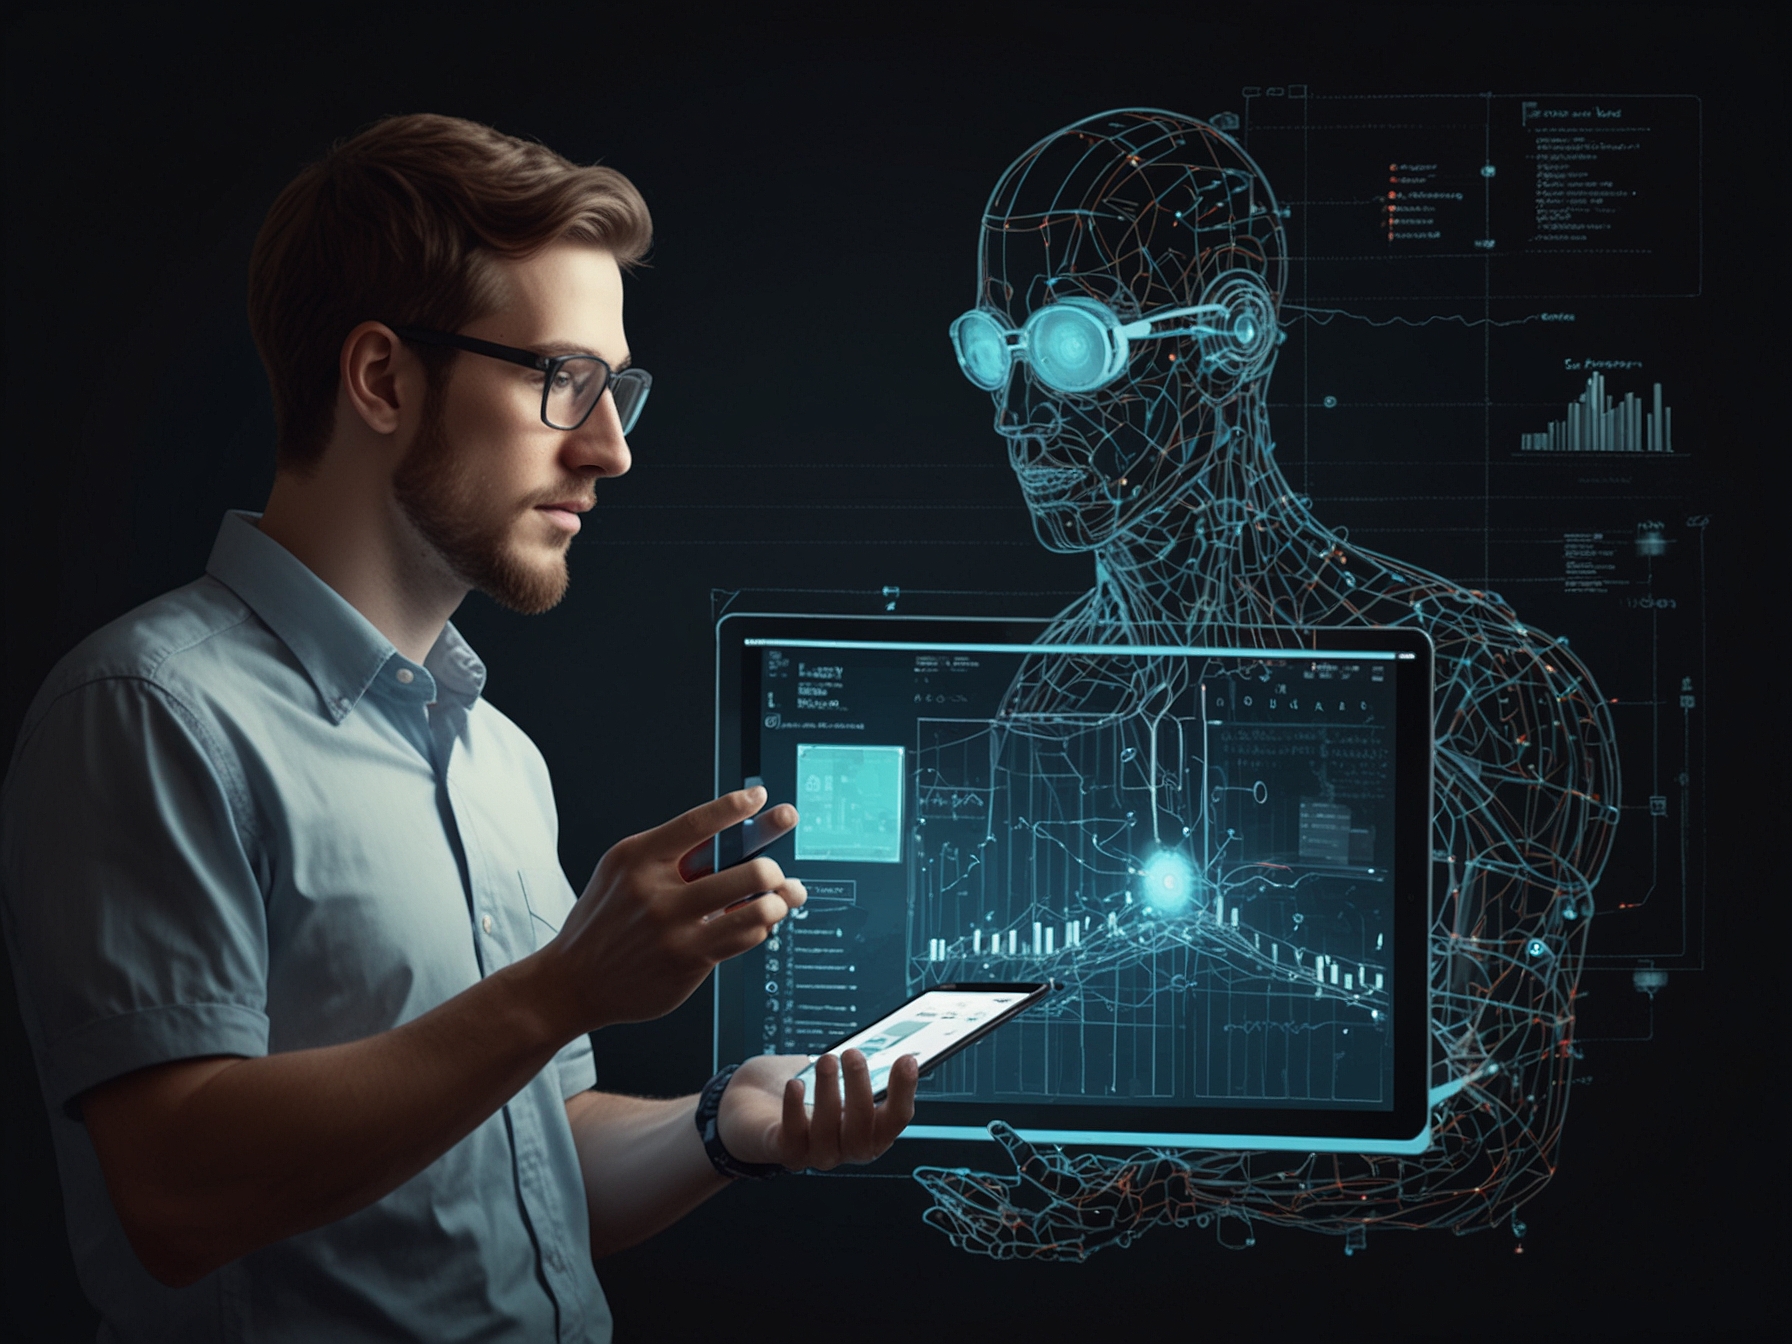 An illustration depicting two developers in a discussion, one holding a tablet showing a code screen with AI-assist features, highlighting collaborative aspects of the AI programmer.